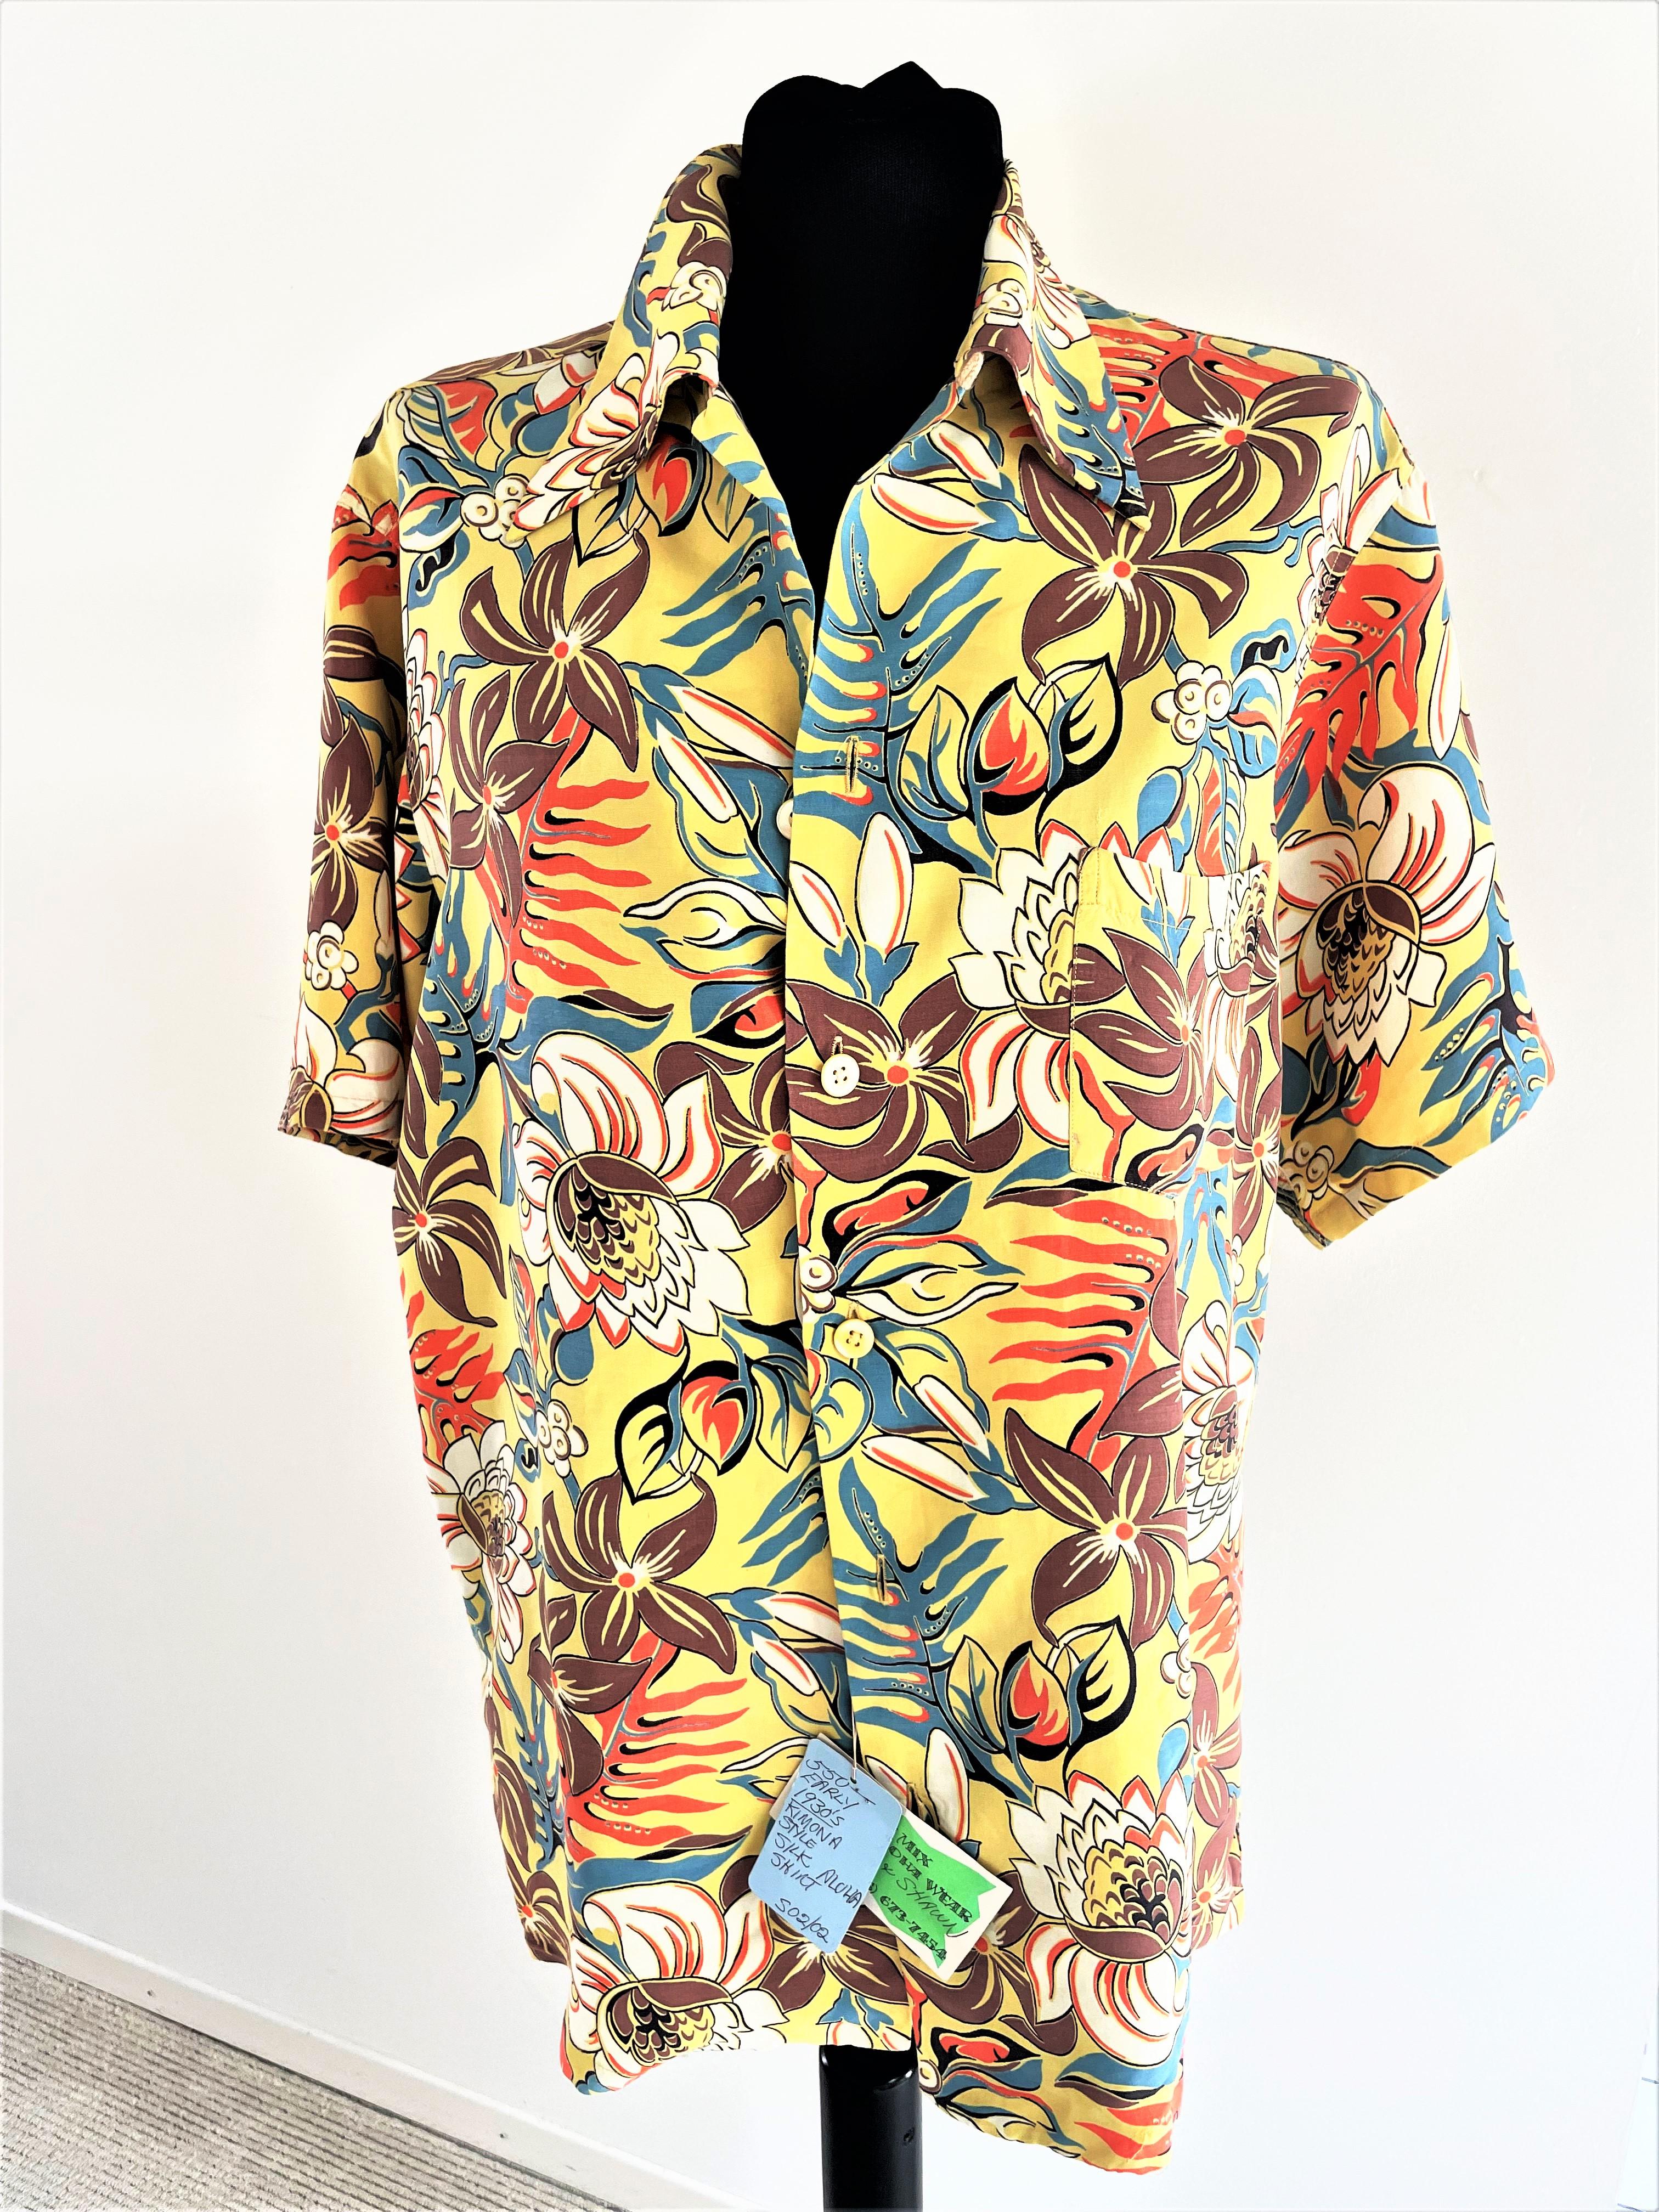 An original vintage ALOHA shirt Complex 1940s Rayon Hawaiian botanical by 'Jantzen made in USA' size M, quality Rayon, original collar and not turned, washable!
Measurement: Chest 120 cm/47